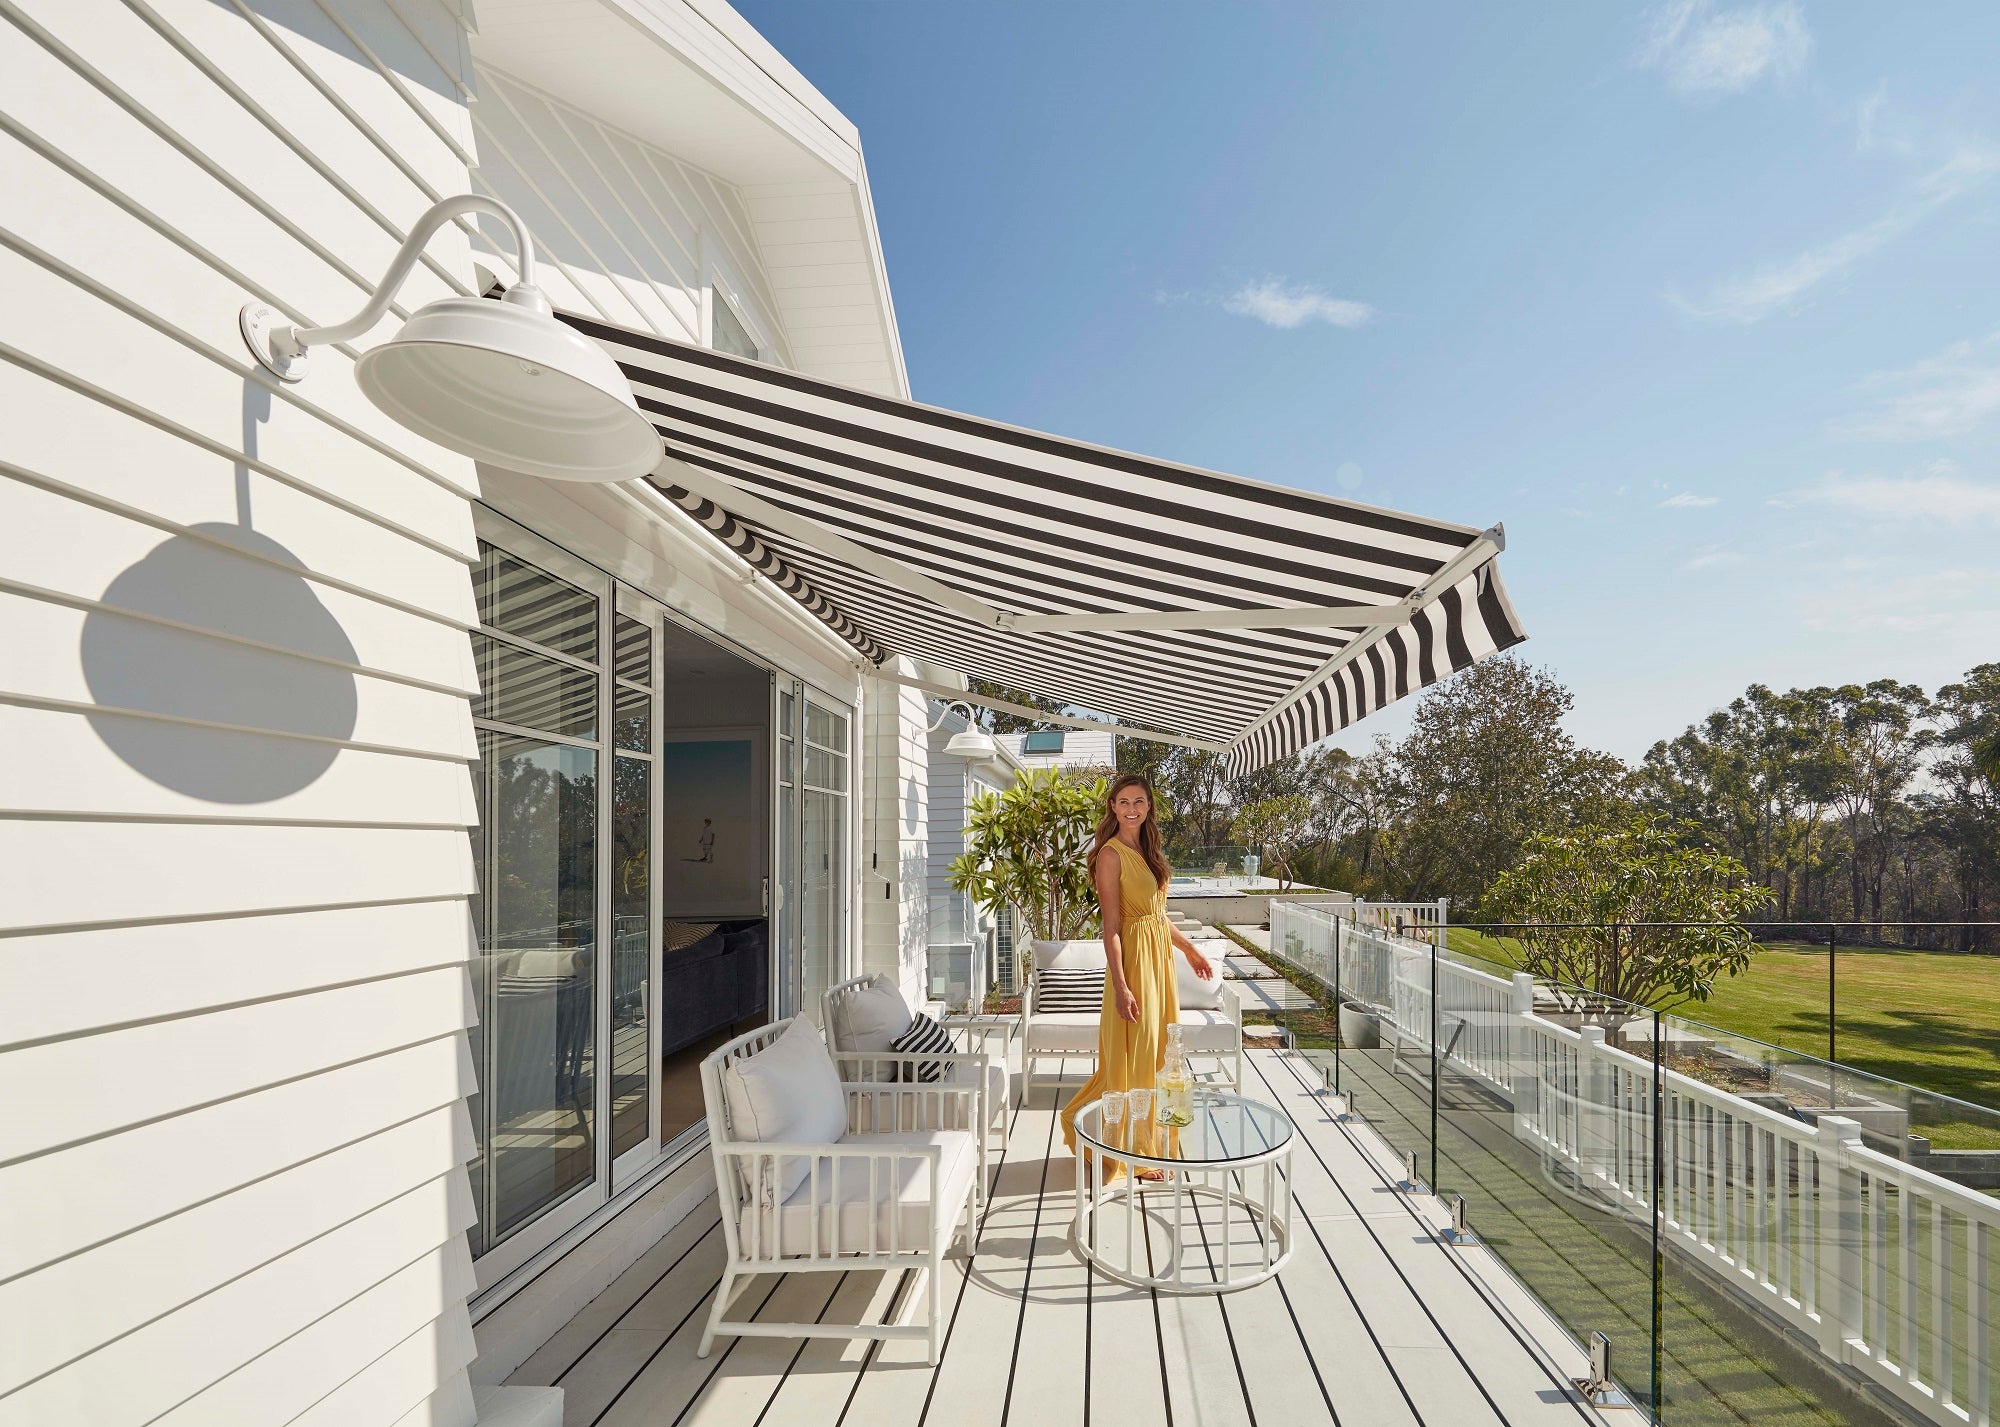 Best Awnings For Sydney Homes: Stylish & Functional Shade Solutions ...